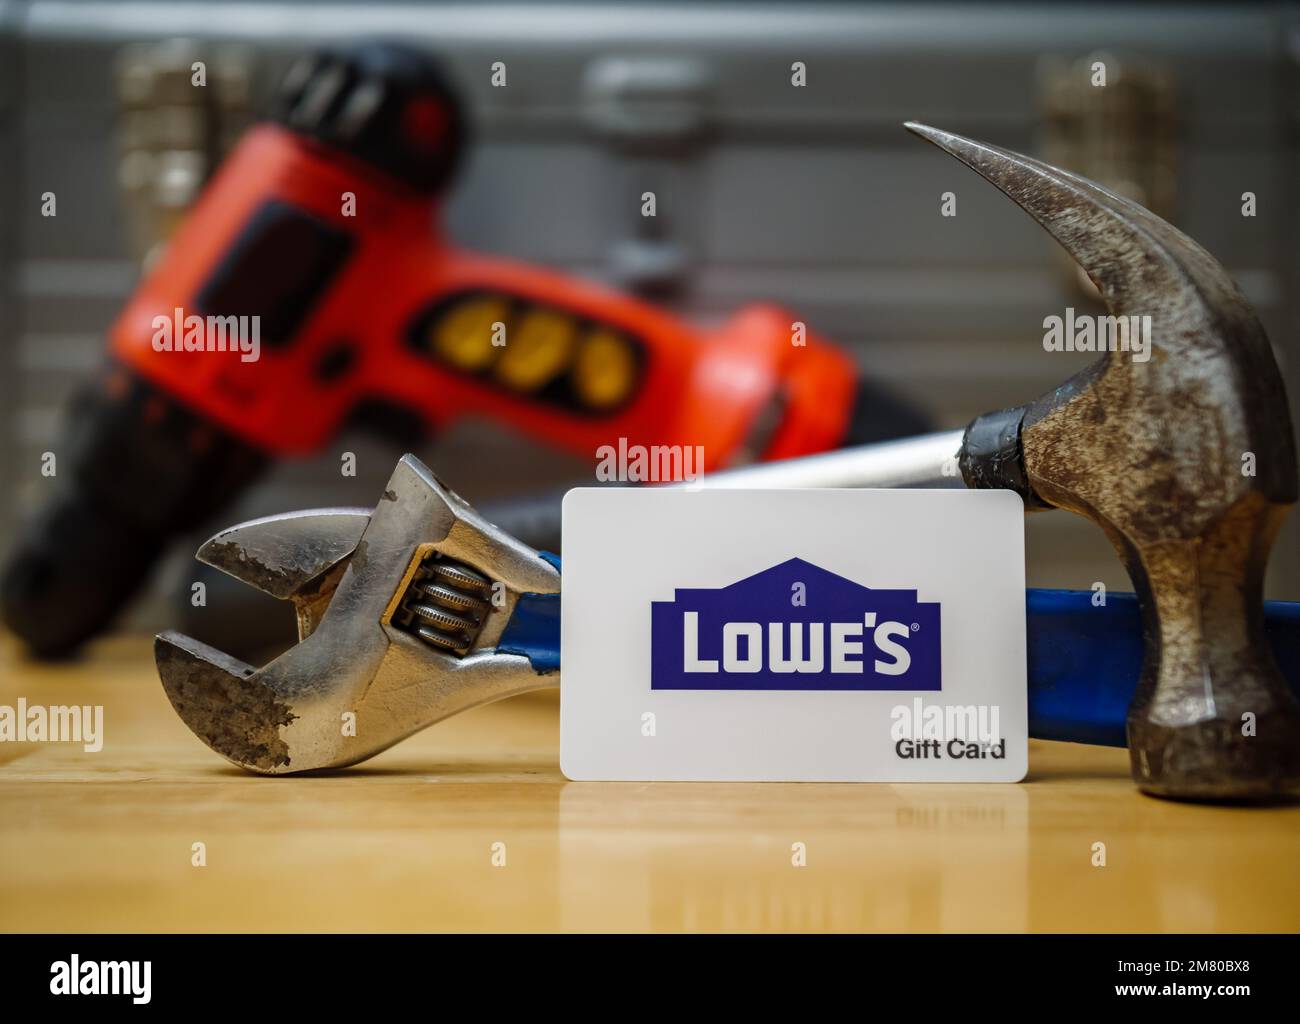 Lowe's home improvement store gift card. Stock Photo